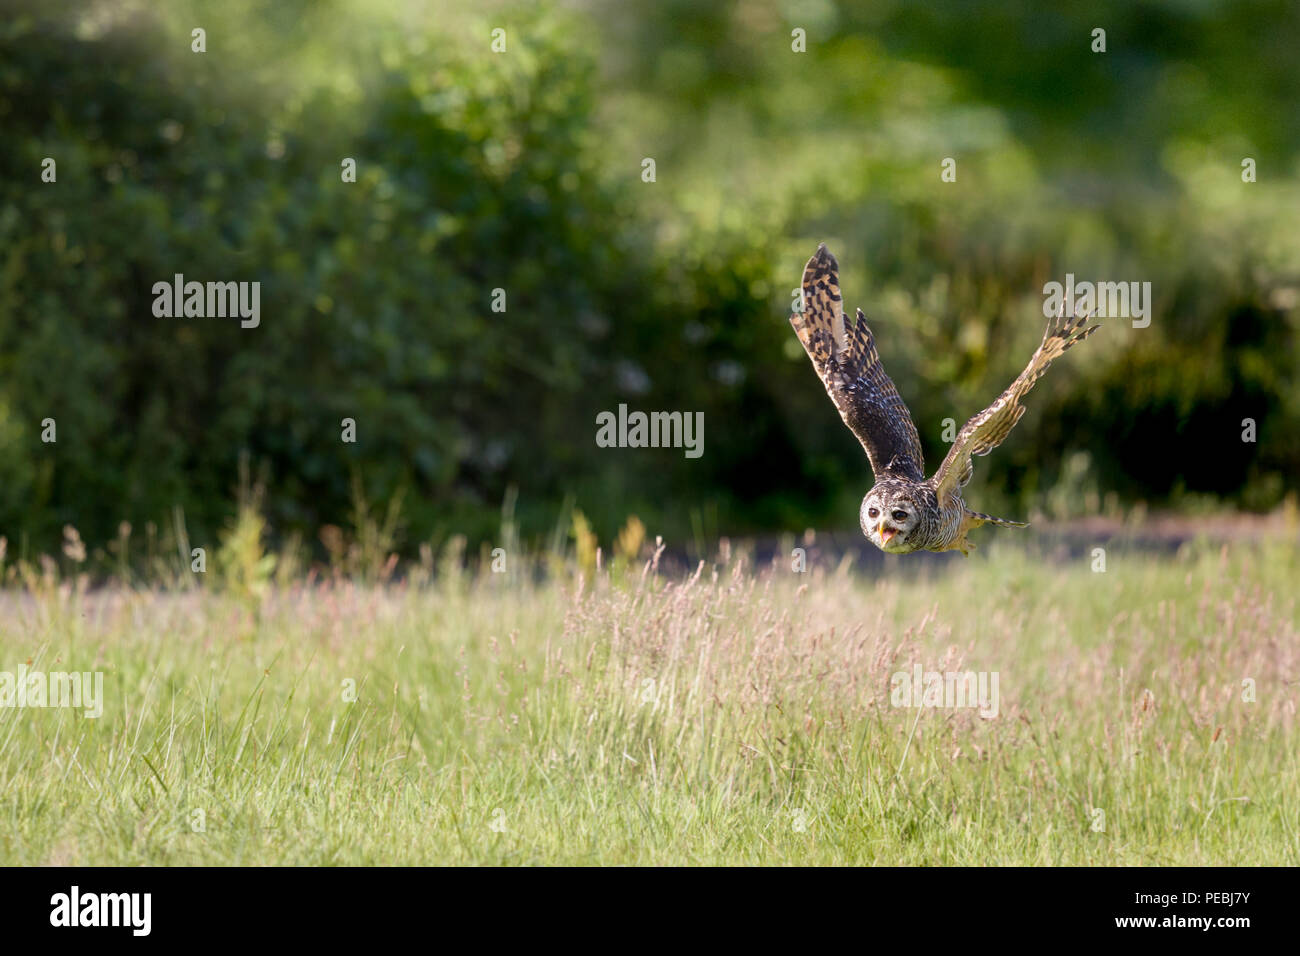 South American Chaco owl flying low over grasslands Stock Photo